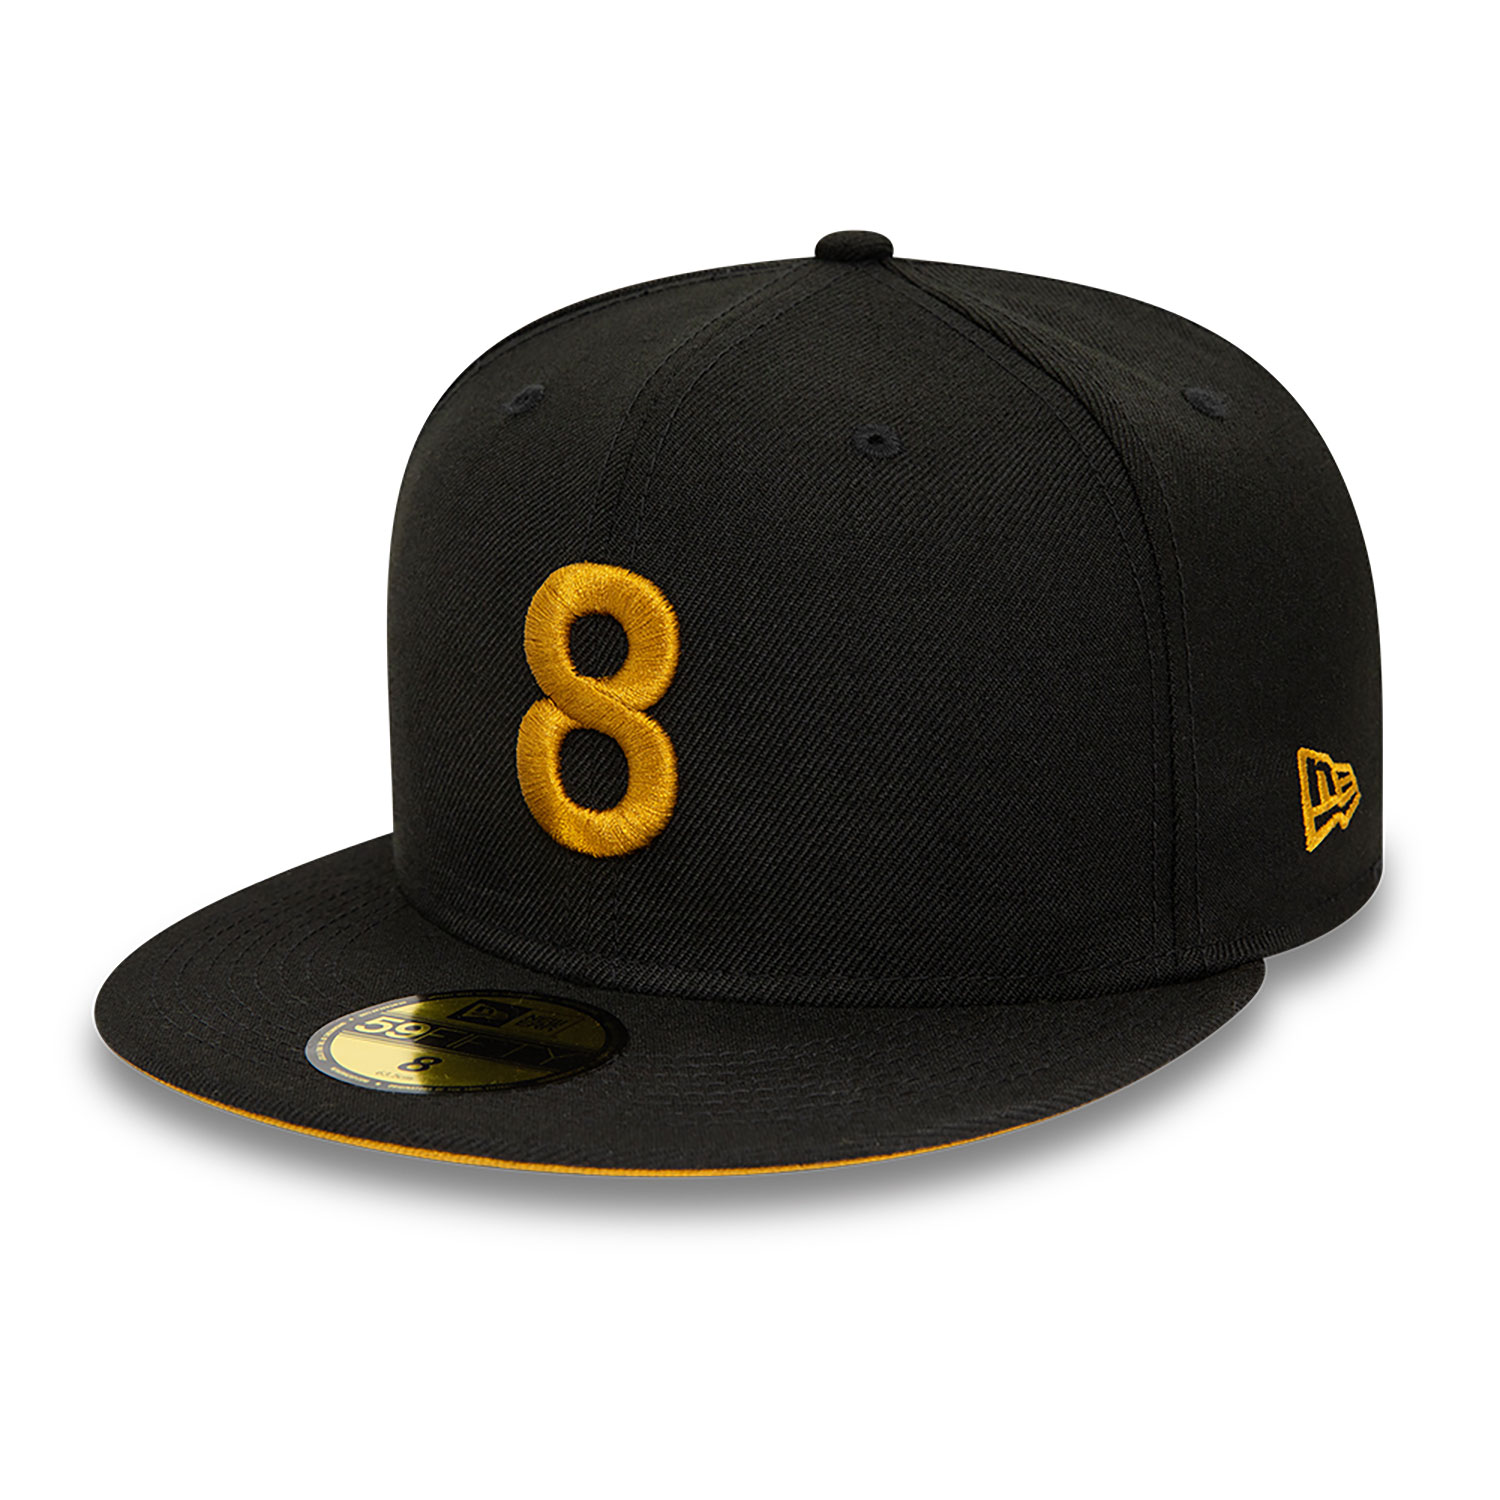 New Era 8 59FIFTY Day Black 59FIFTY Fitted Cap